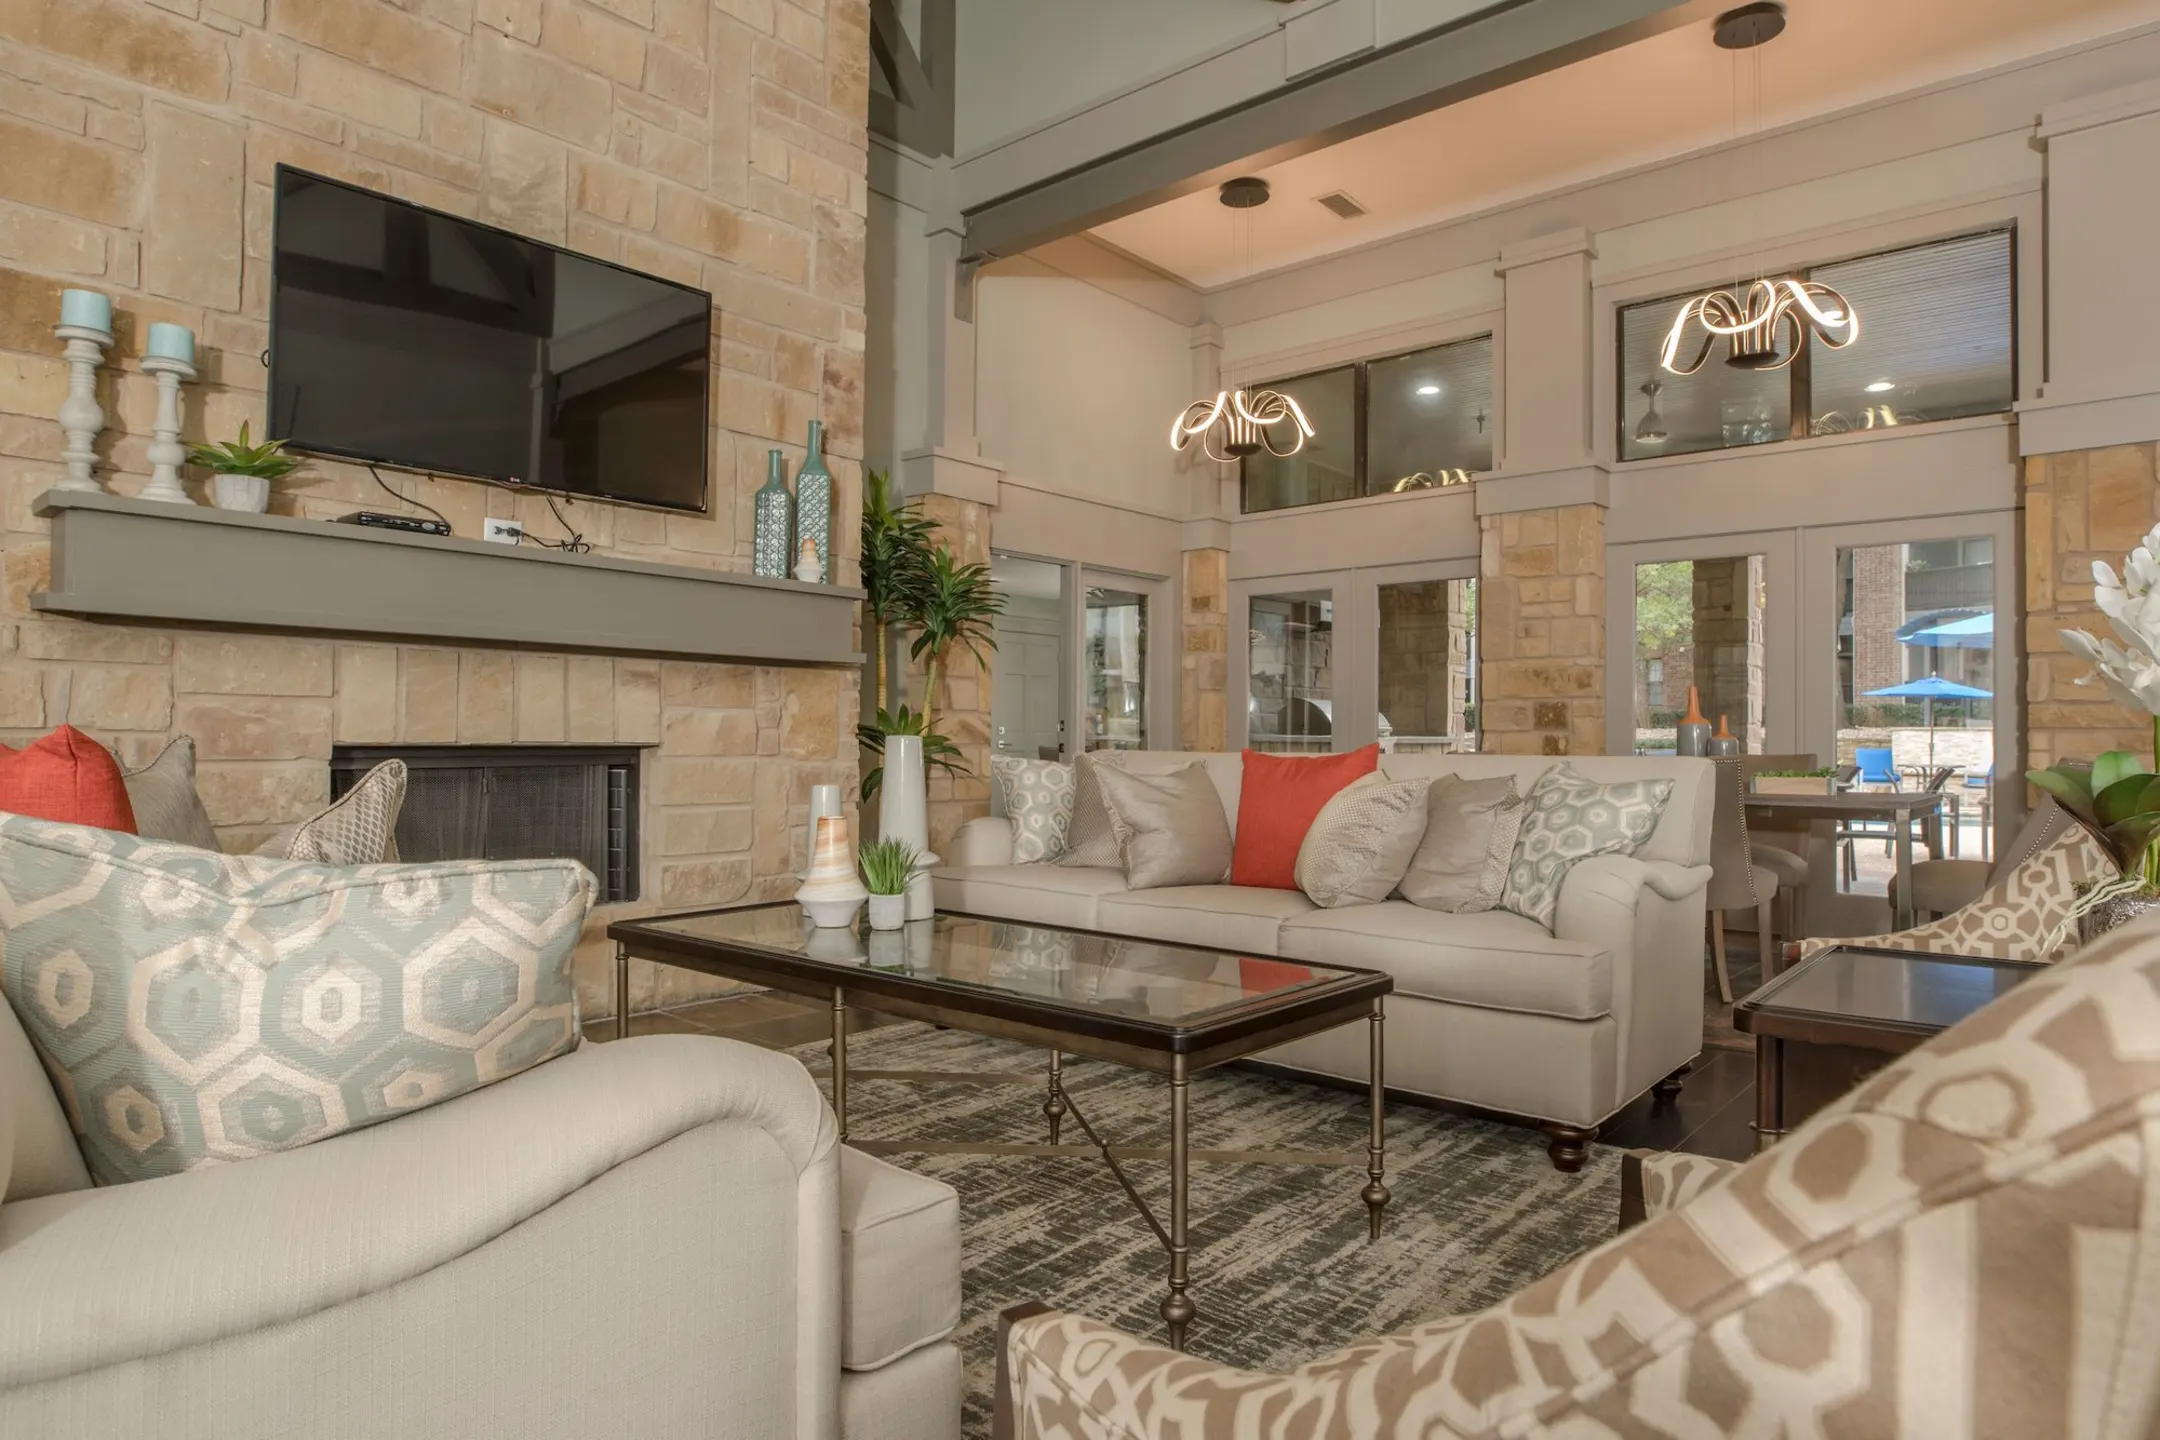 Living Room - The Overlook At Bear Creek - Euless, TX